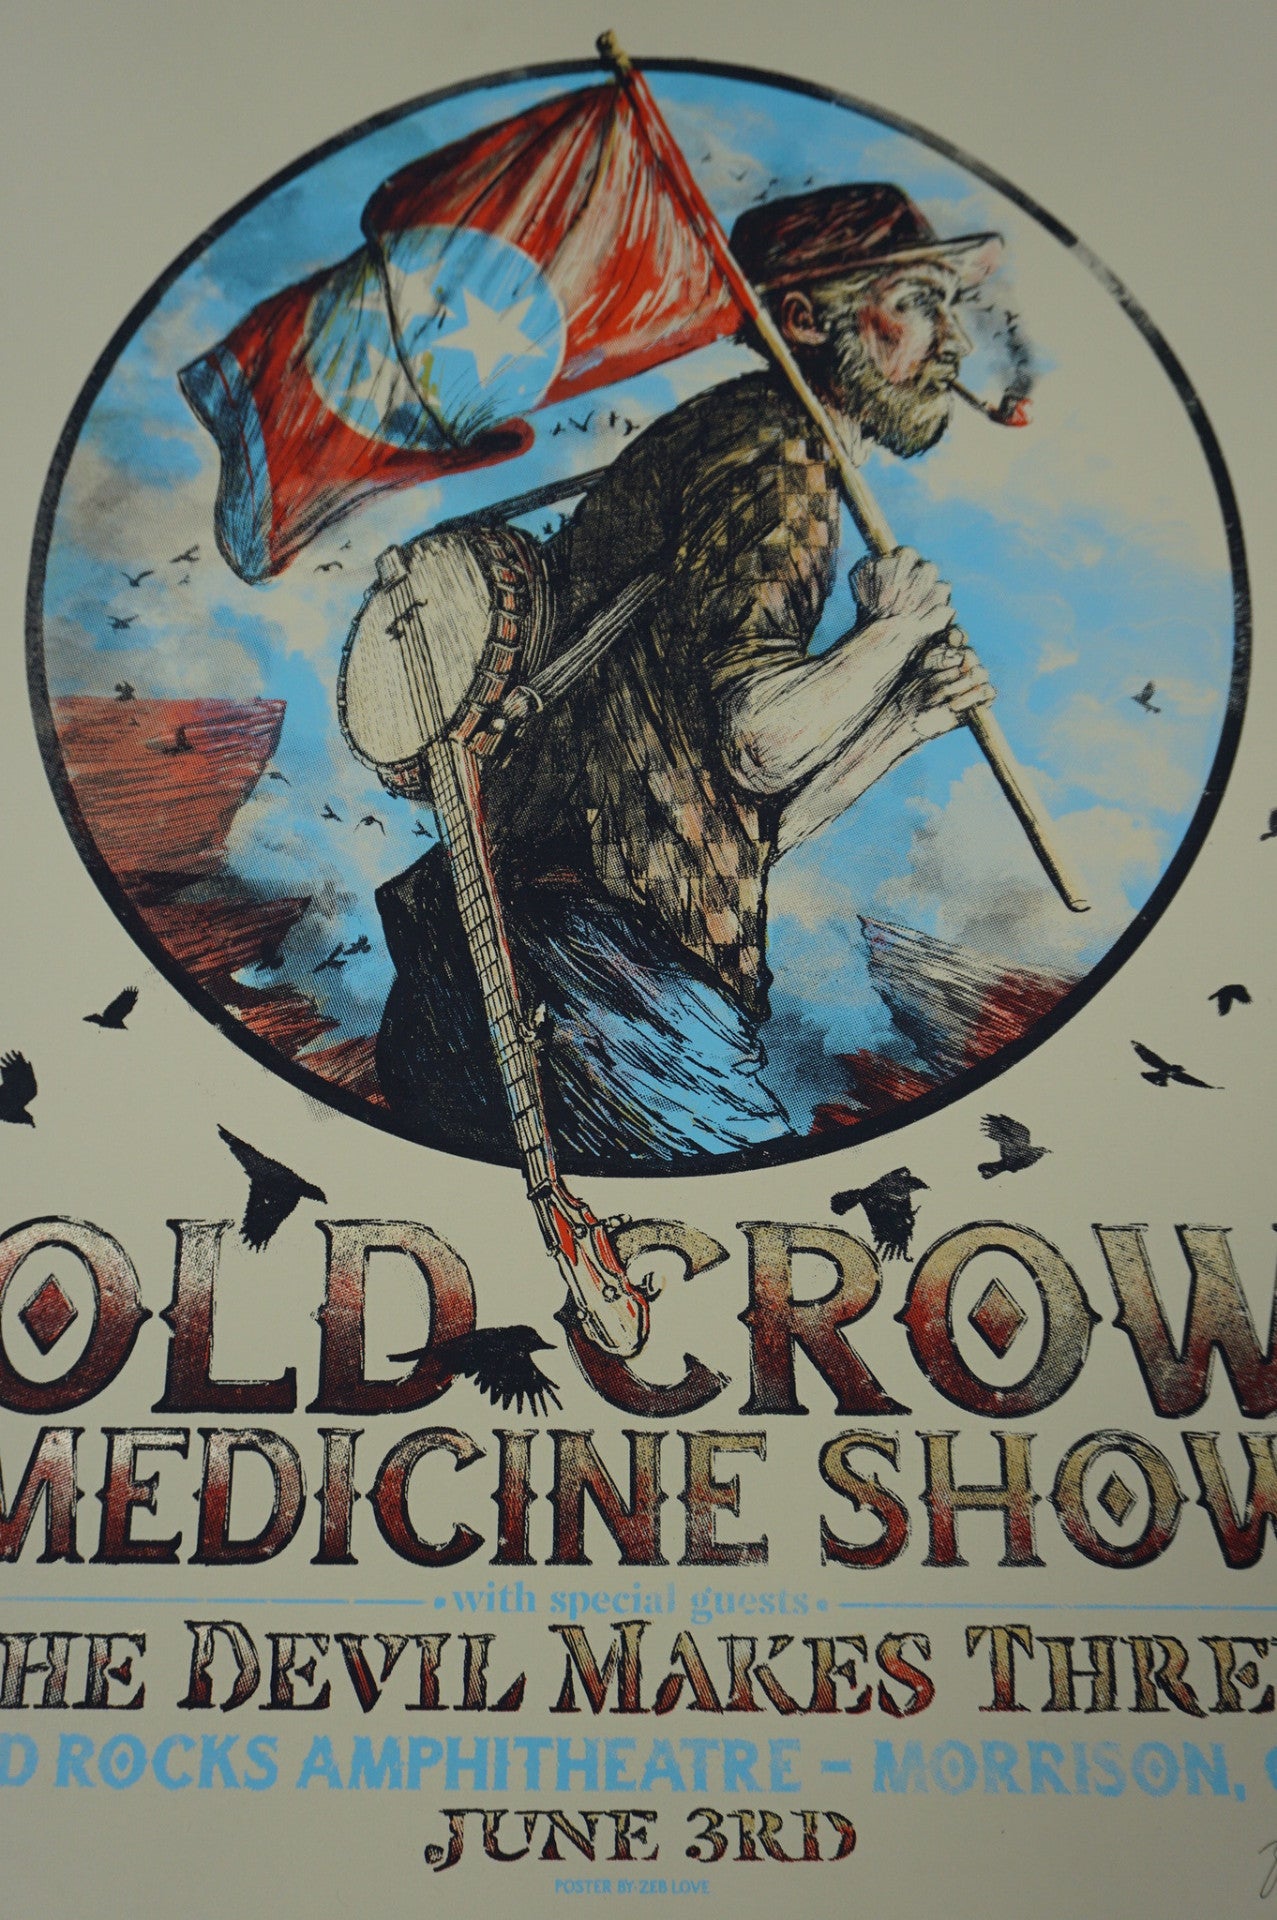 old froq medicine show